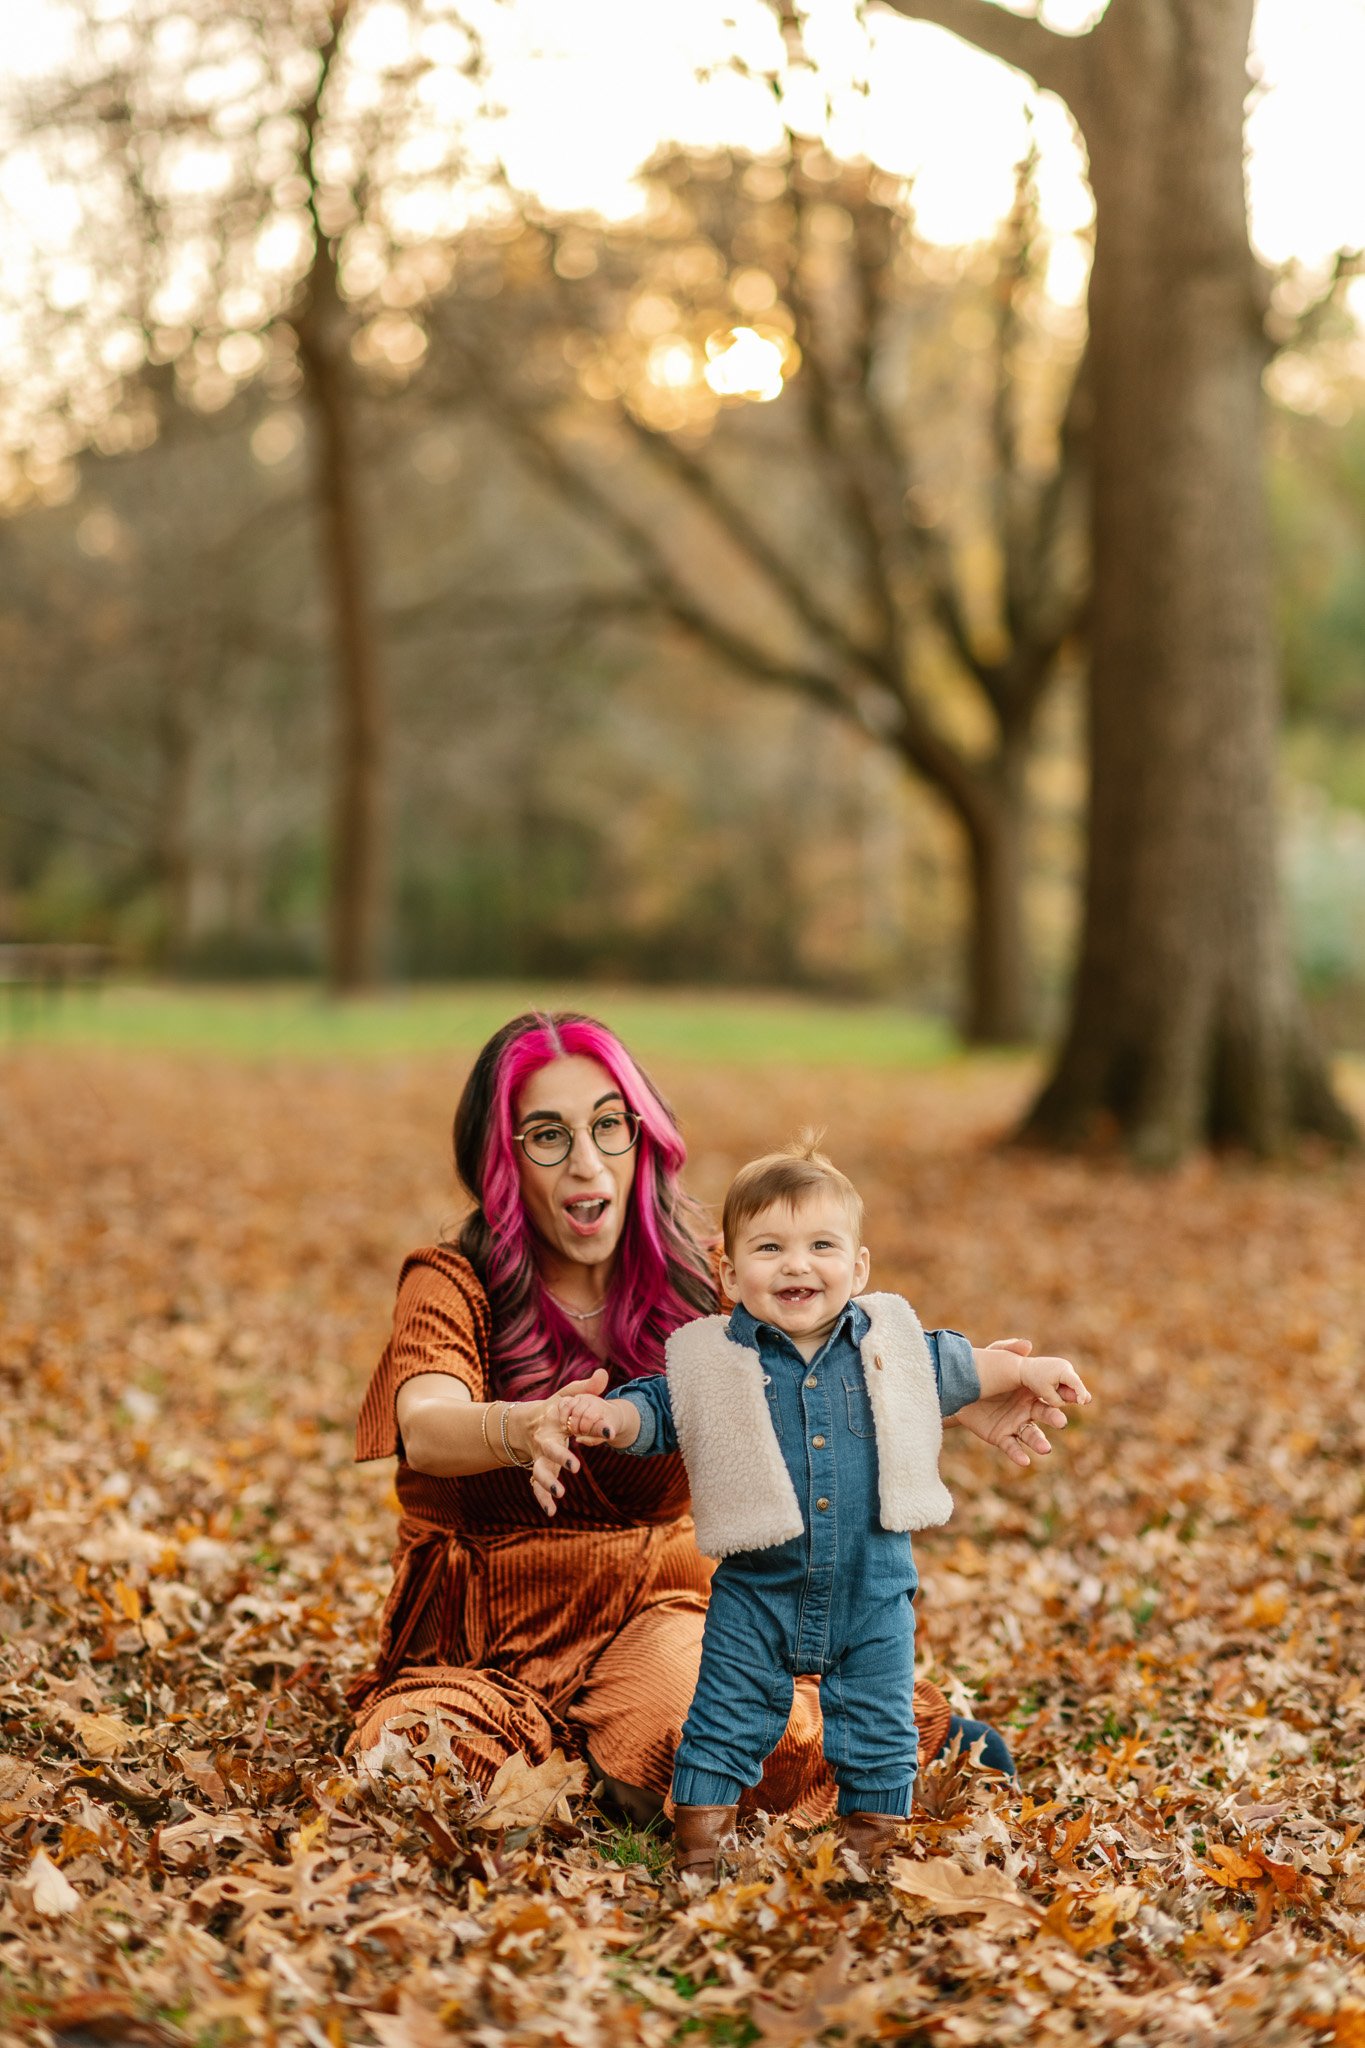  Nicole Hawkins Photography captures a mother watching her little girl trying to learn how to walk. walking pictures of baby #NicoleHawkinsPhotography #NicoleHawkinsFamily #fallfamilyphotos #fallphotos #familyphotographerNJ #NJfallfamilypics 